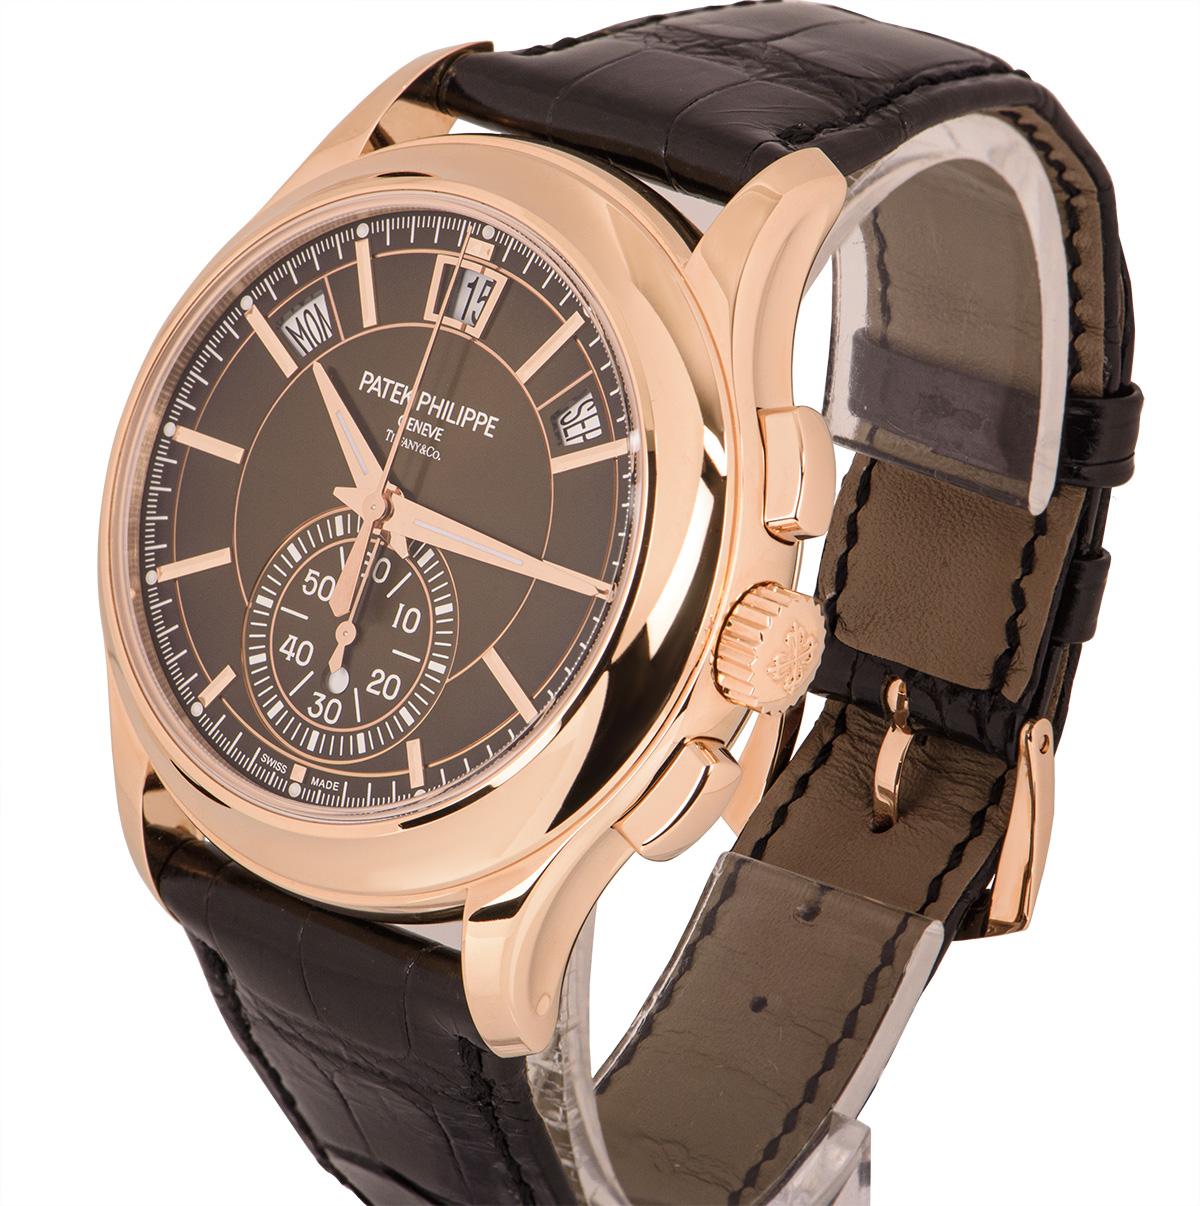 An Unworn 18kRose Gold 42mm Complications Annual Calendar Men's Wristwatch, the double name Tiffany & Co.brown sunburst dial gradually grading to black, applied hour markers, the month between 1 and 20'clock, small seconds with day/night indication